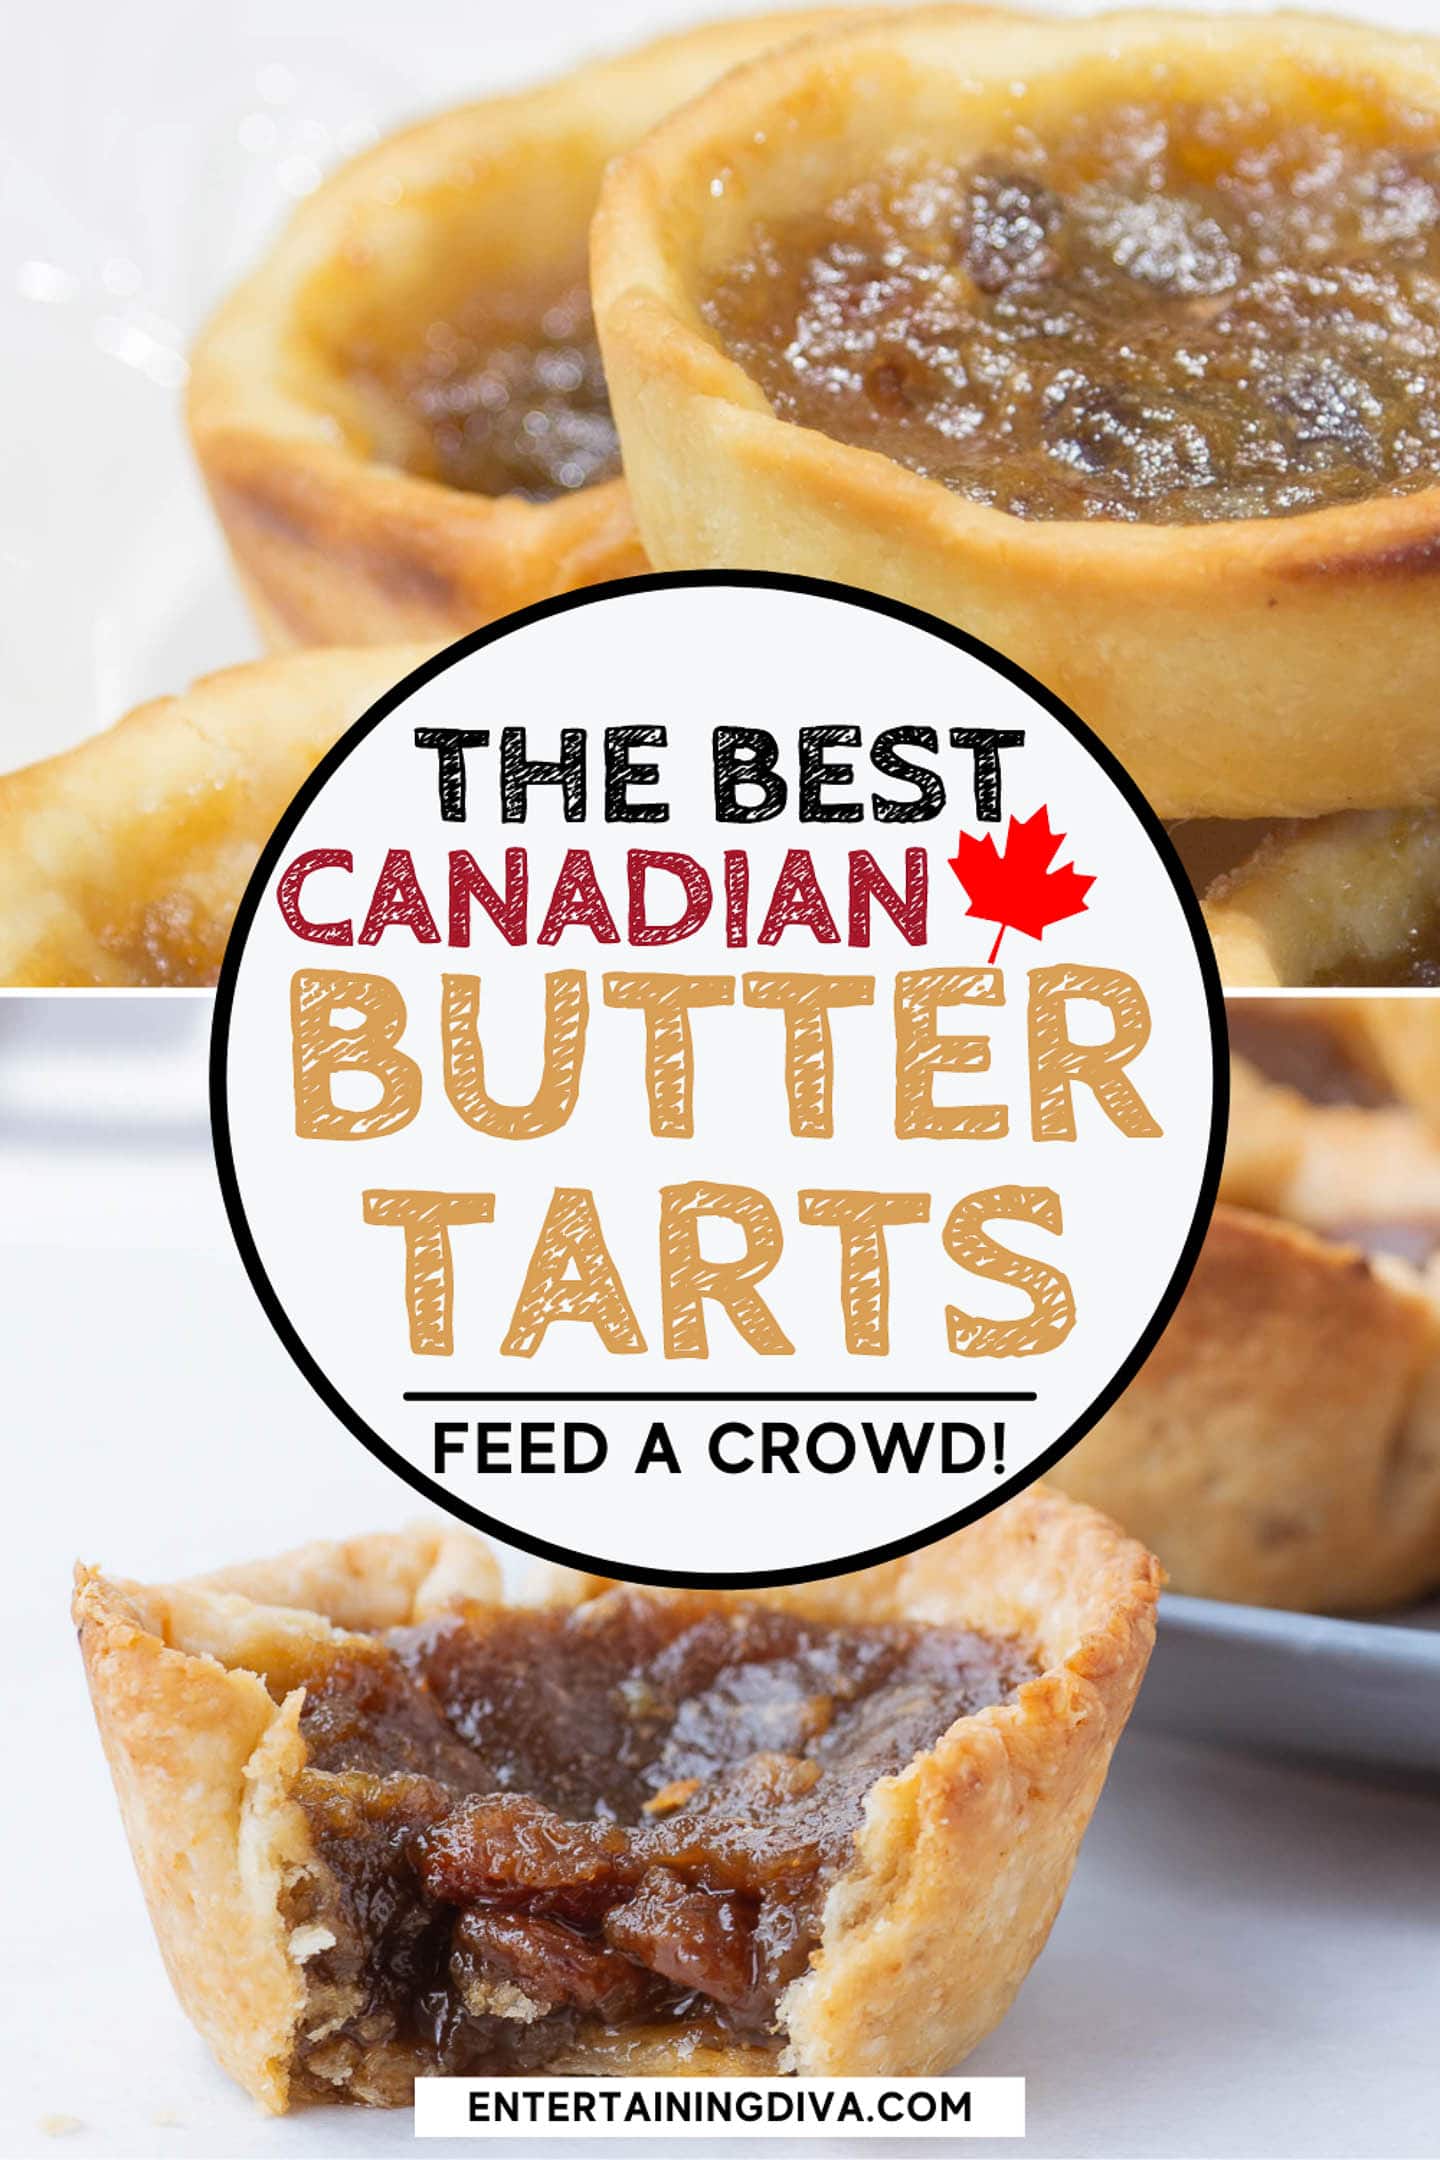 The best Canadian butter tarts